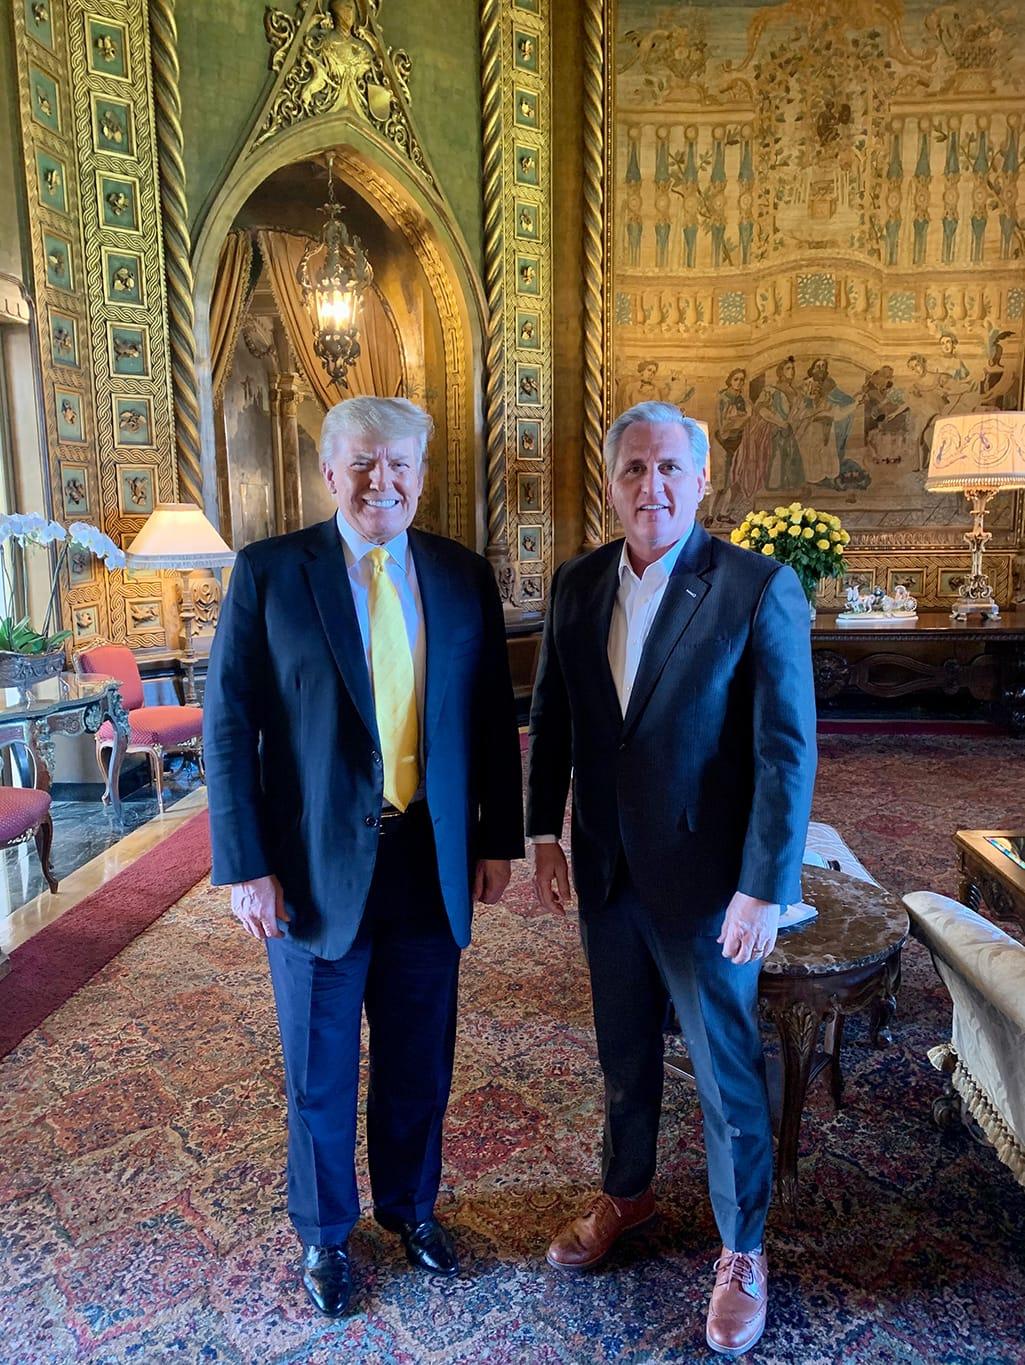 Former President Donald Trump poses with House Minority Leader Kevin McCarthy (R-Calif.) on Jan. 28, 2021. (Courtesy of Save America PAC)